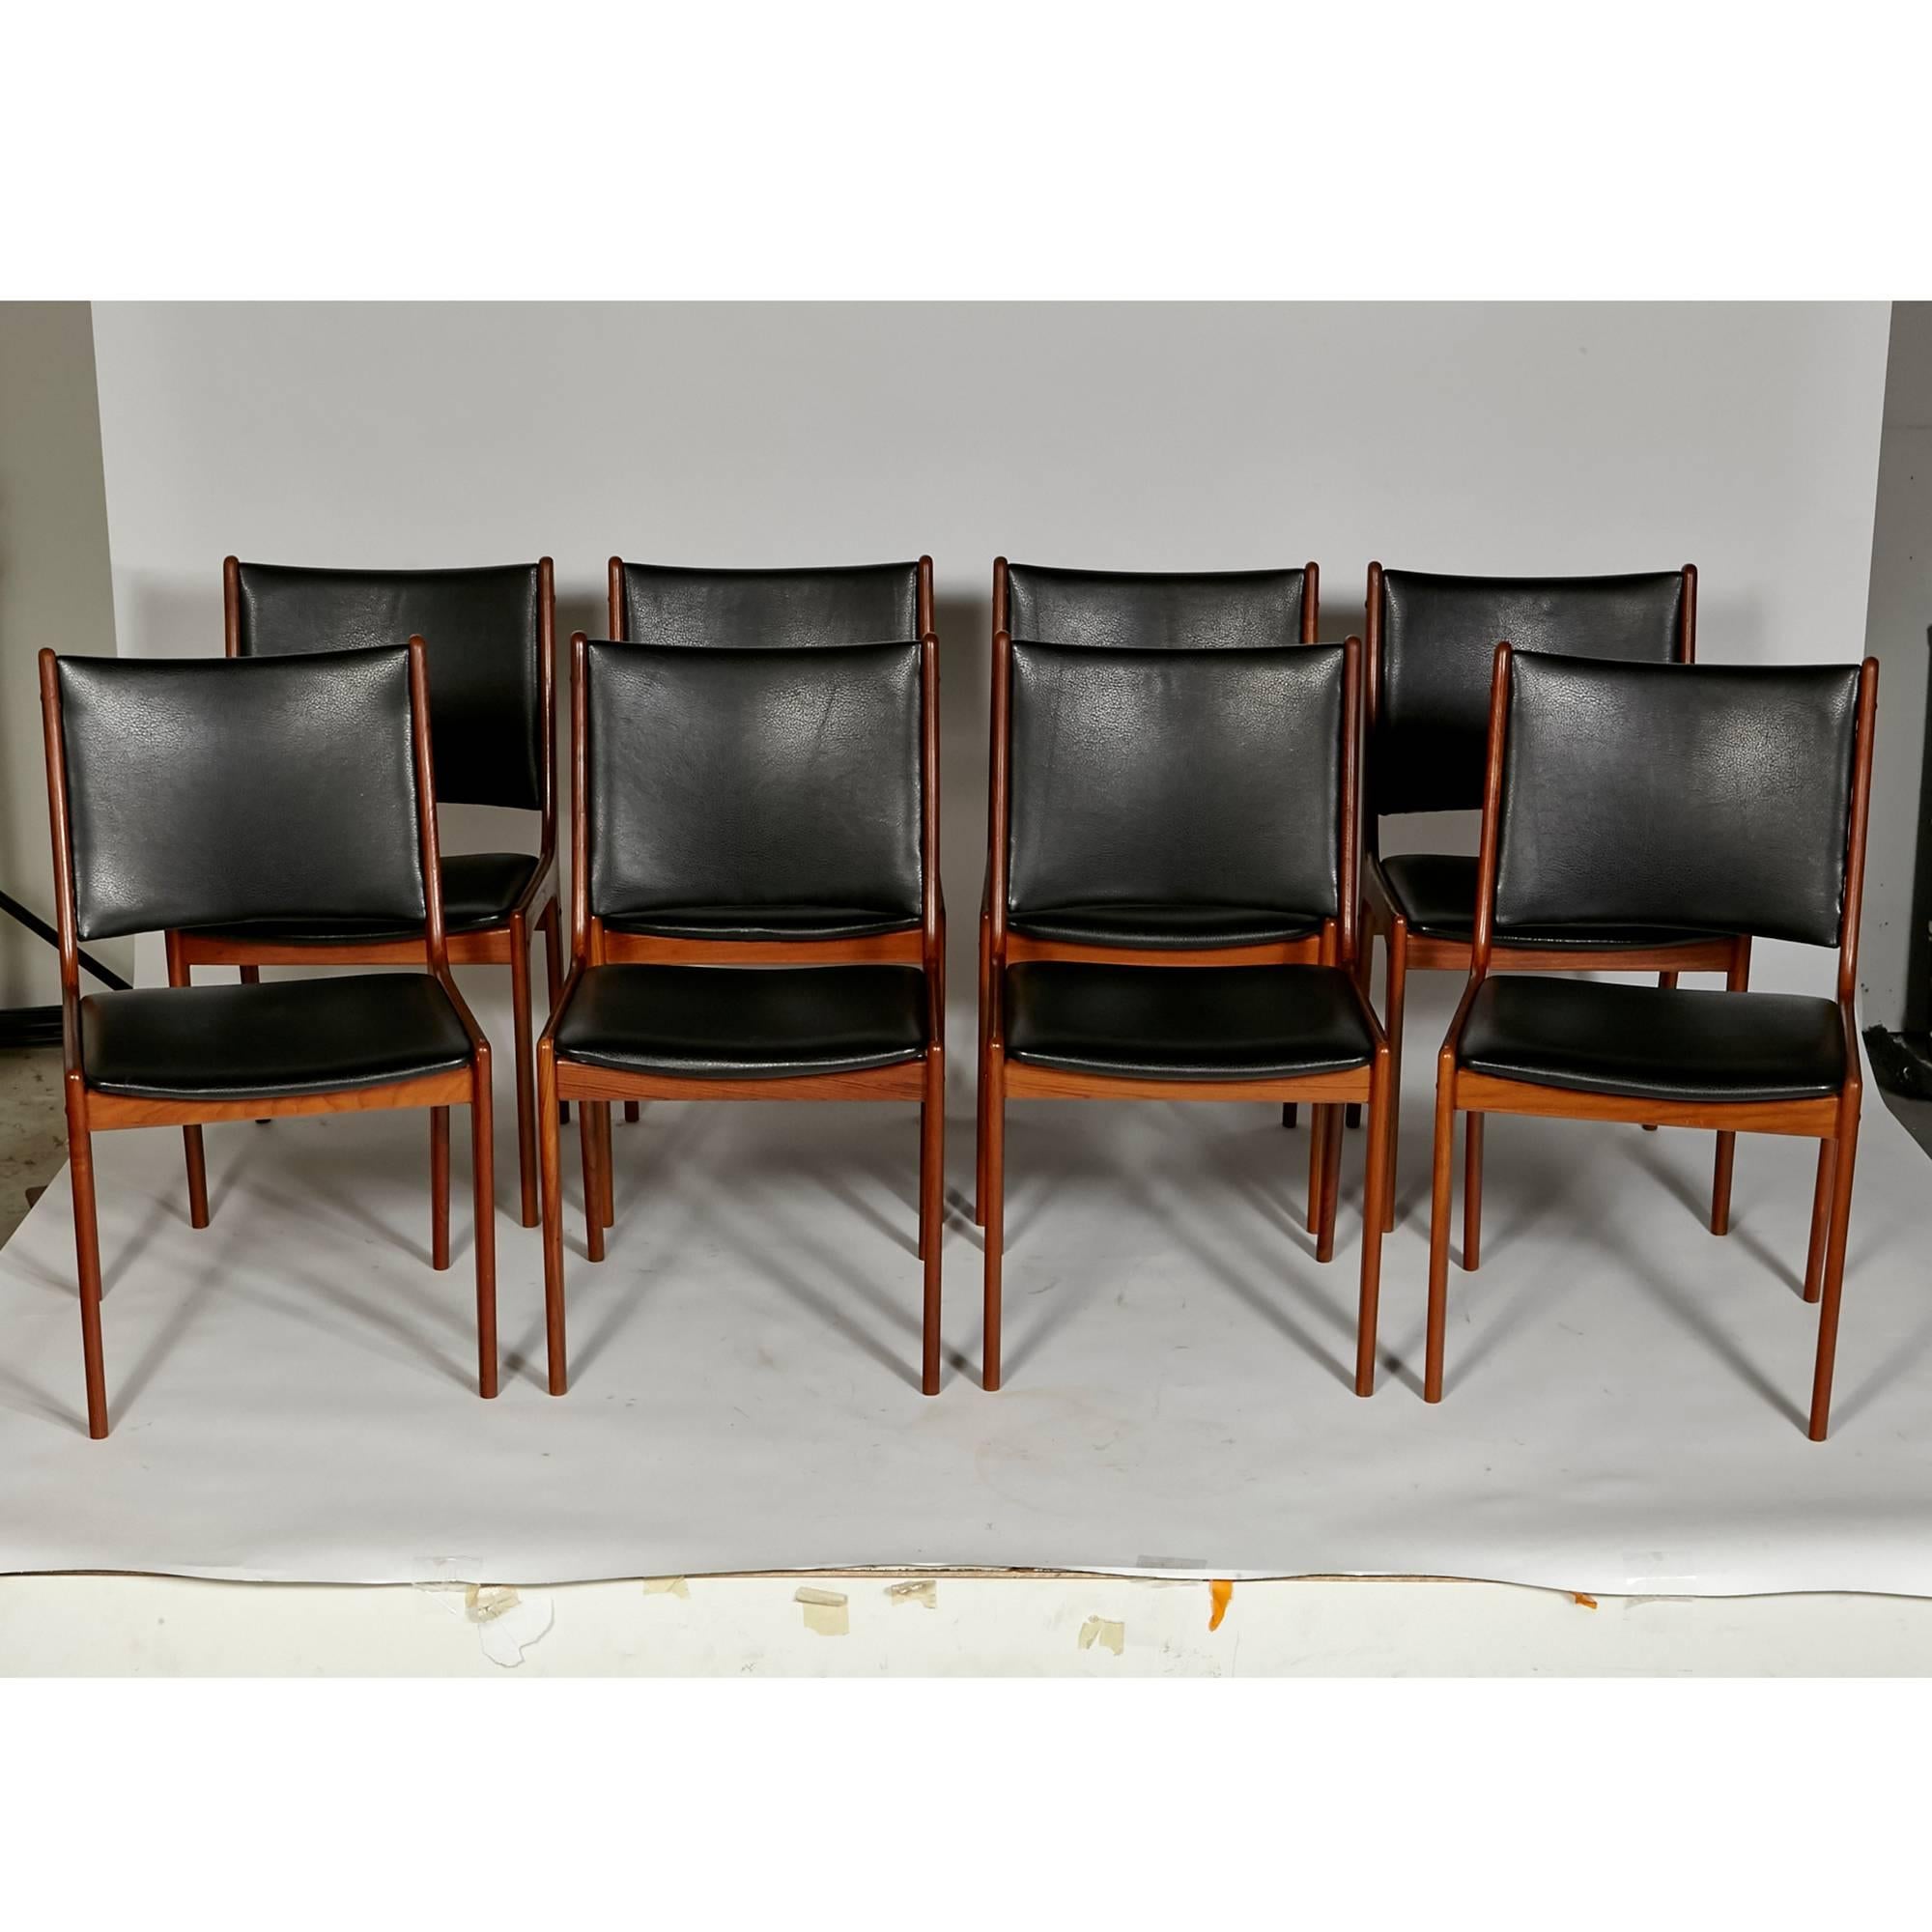 Vintage set of eight teakwood dining chairs. The chairs are newly refinished with new black textured Naugahyde seats and backs. Excellent condition. Unmarked.